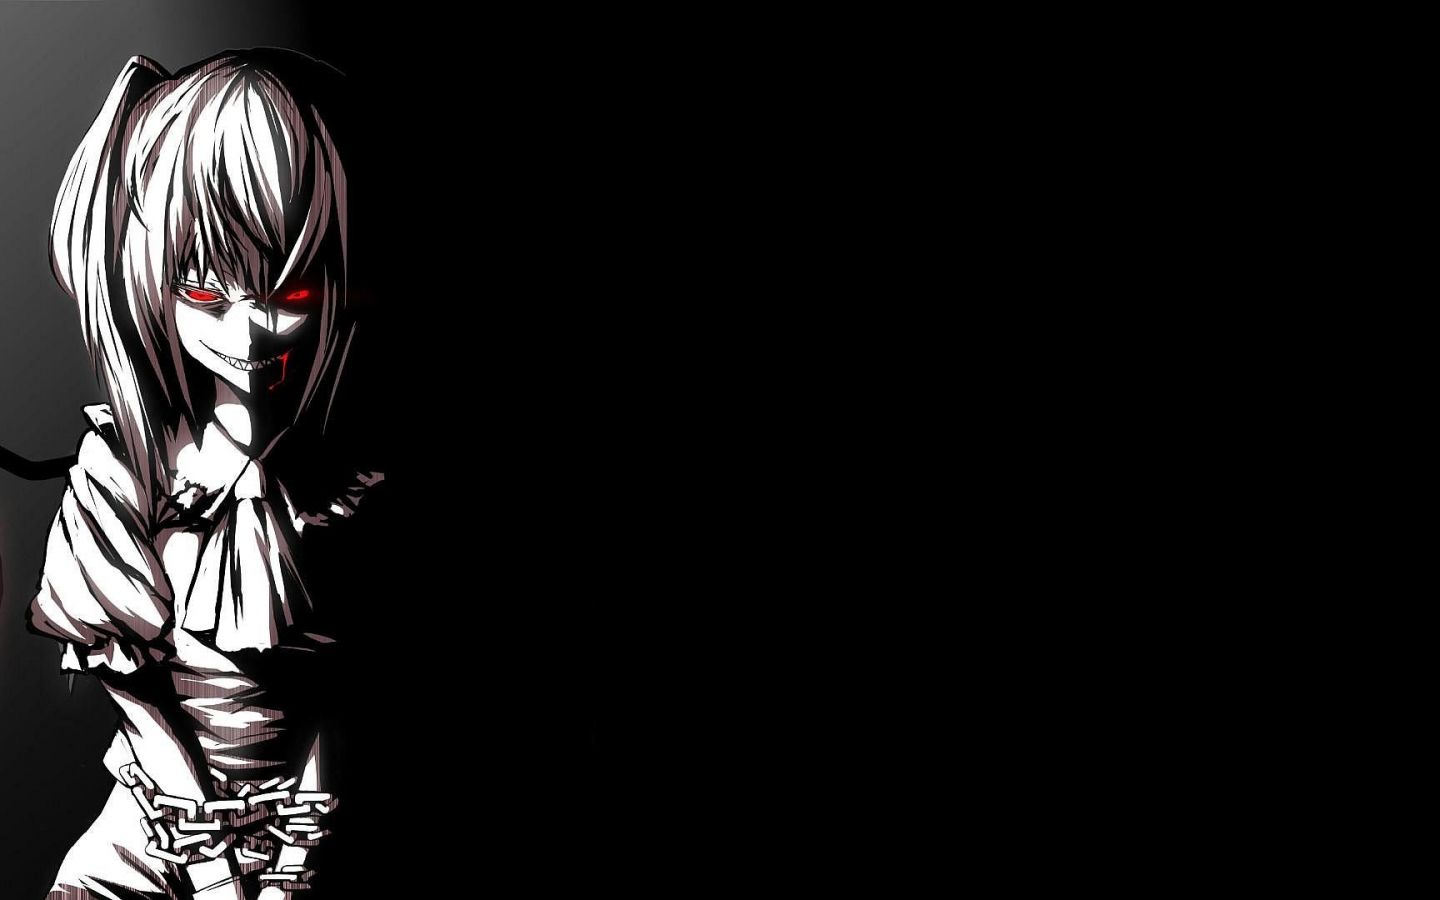 Free download Dark Anime Girl Wallpaper 9691 HD Wallpaper in Anime Imagecicom [1920x1080] for your Desktop, Mobile & Tablet. Explore Red and Black Anime Wallpaper. Red and Black Anime